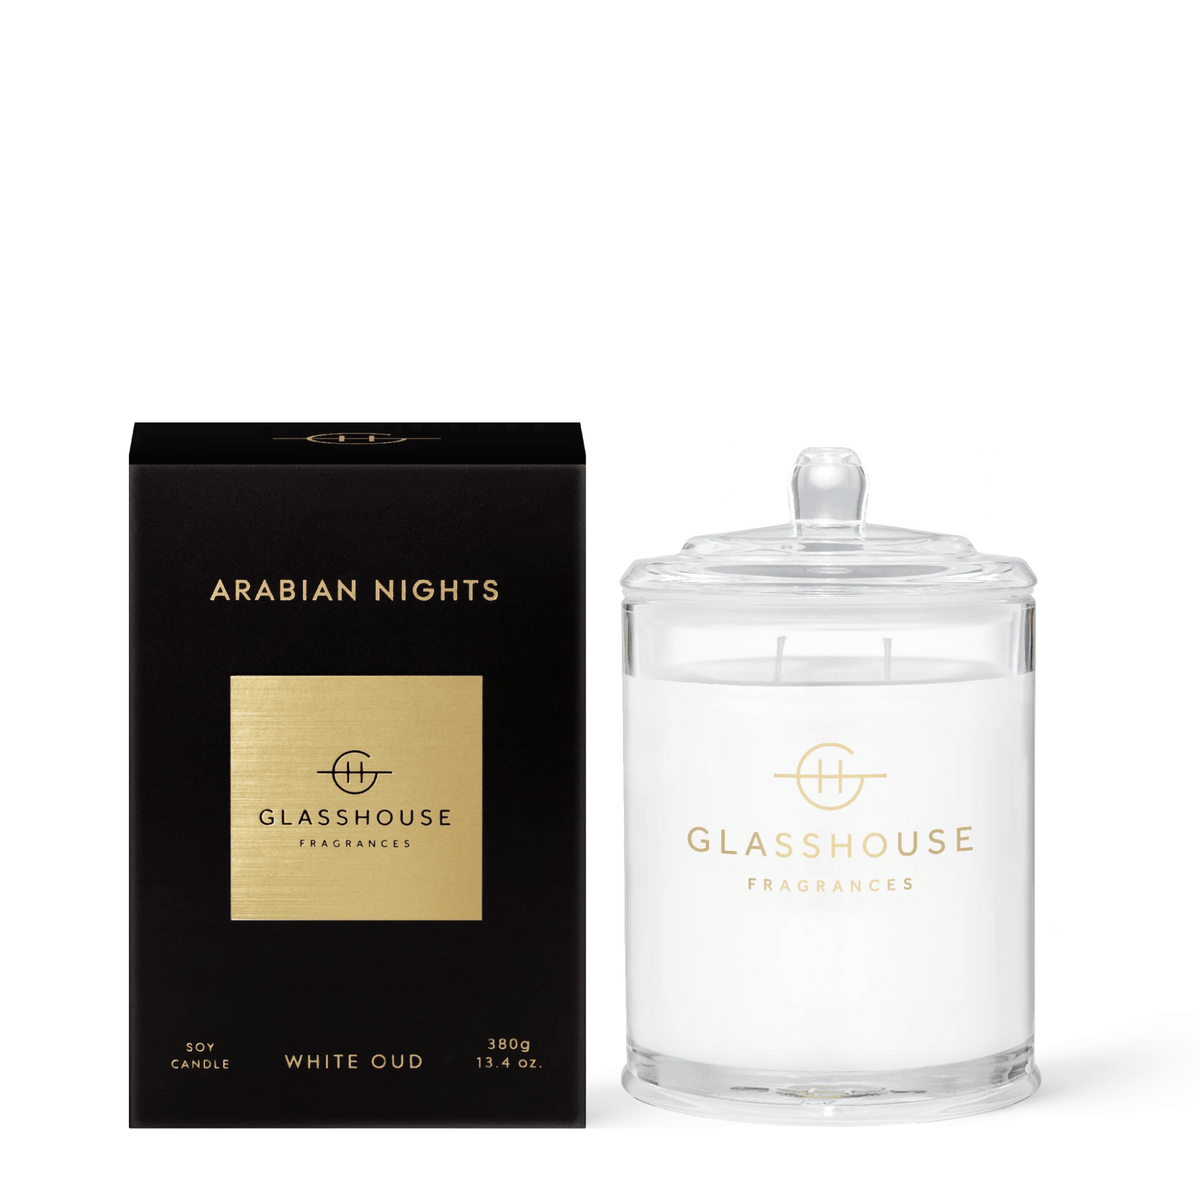 Primary Image of Arabian Nights Candle